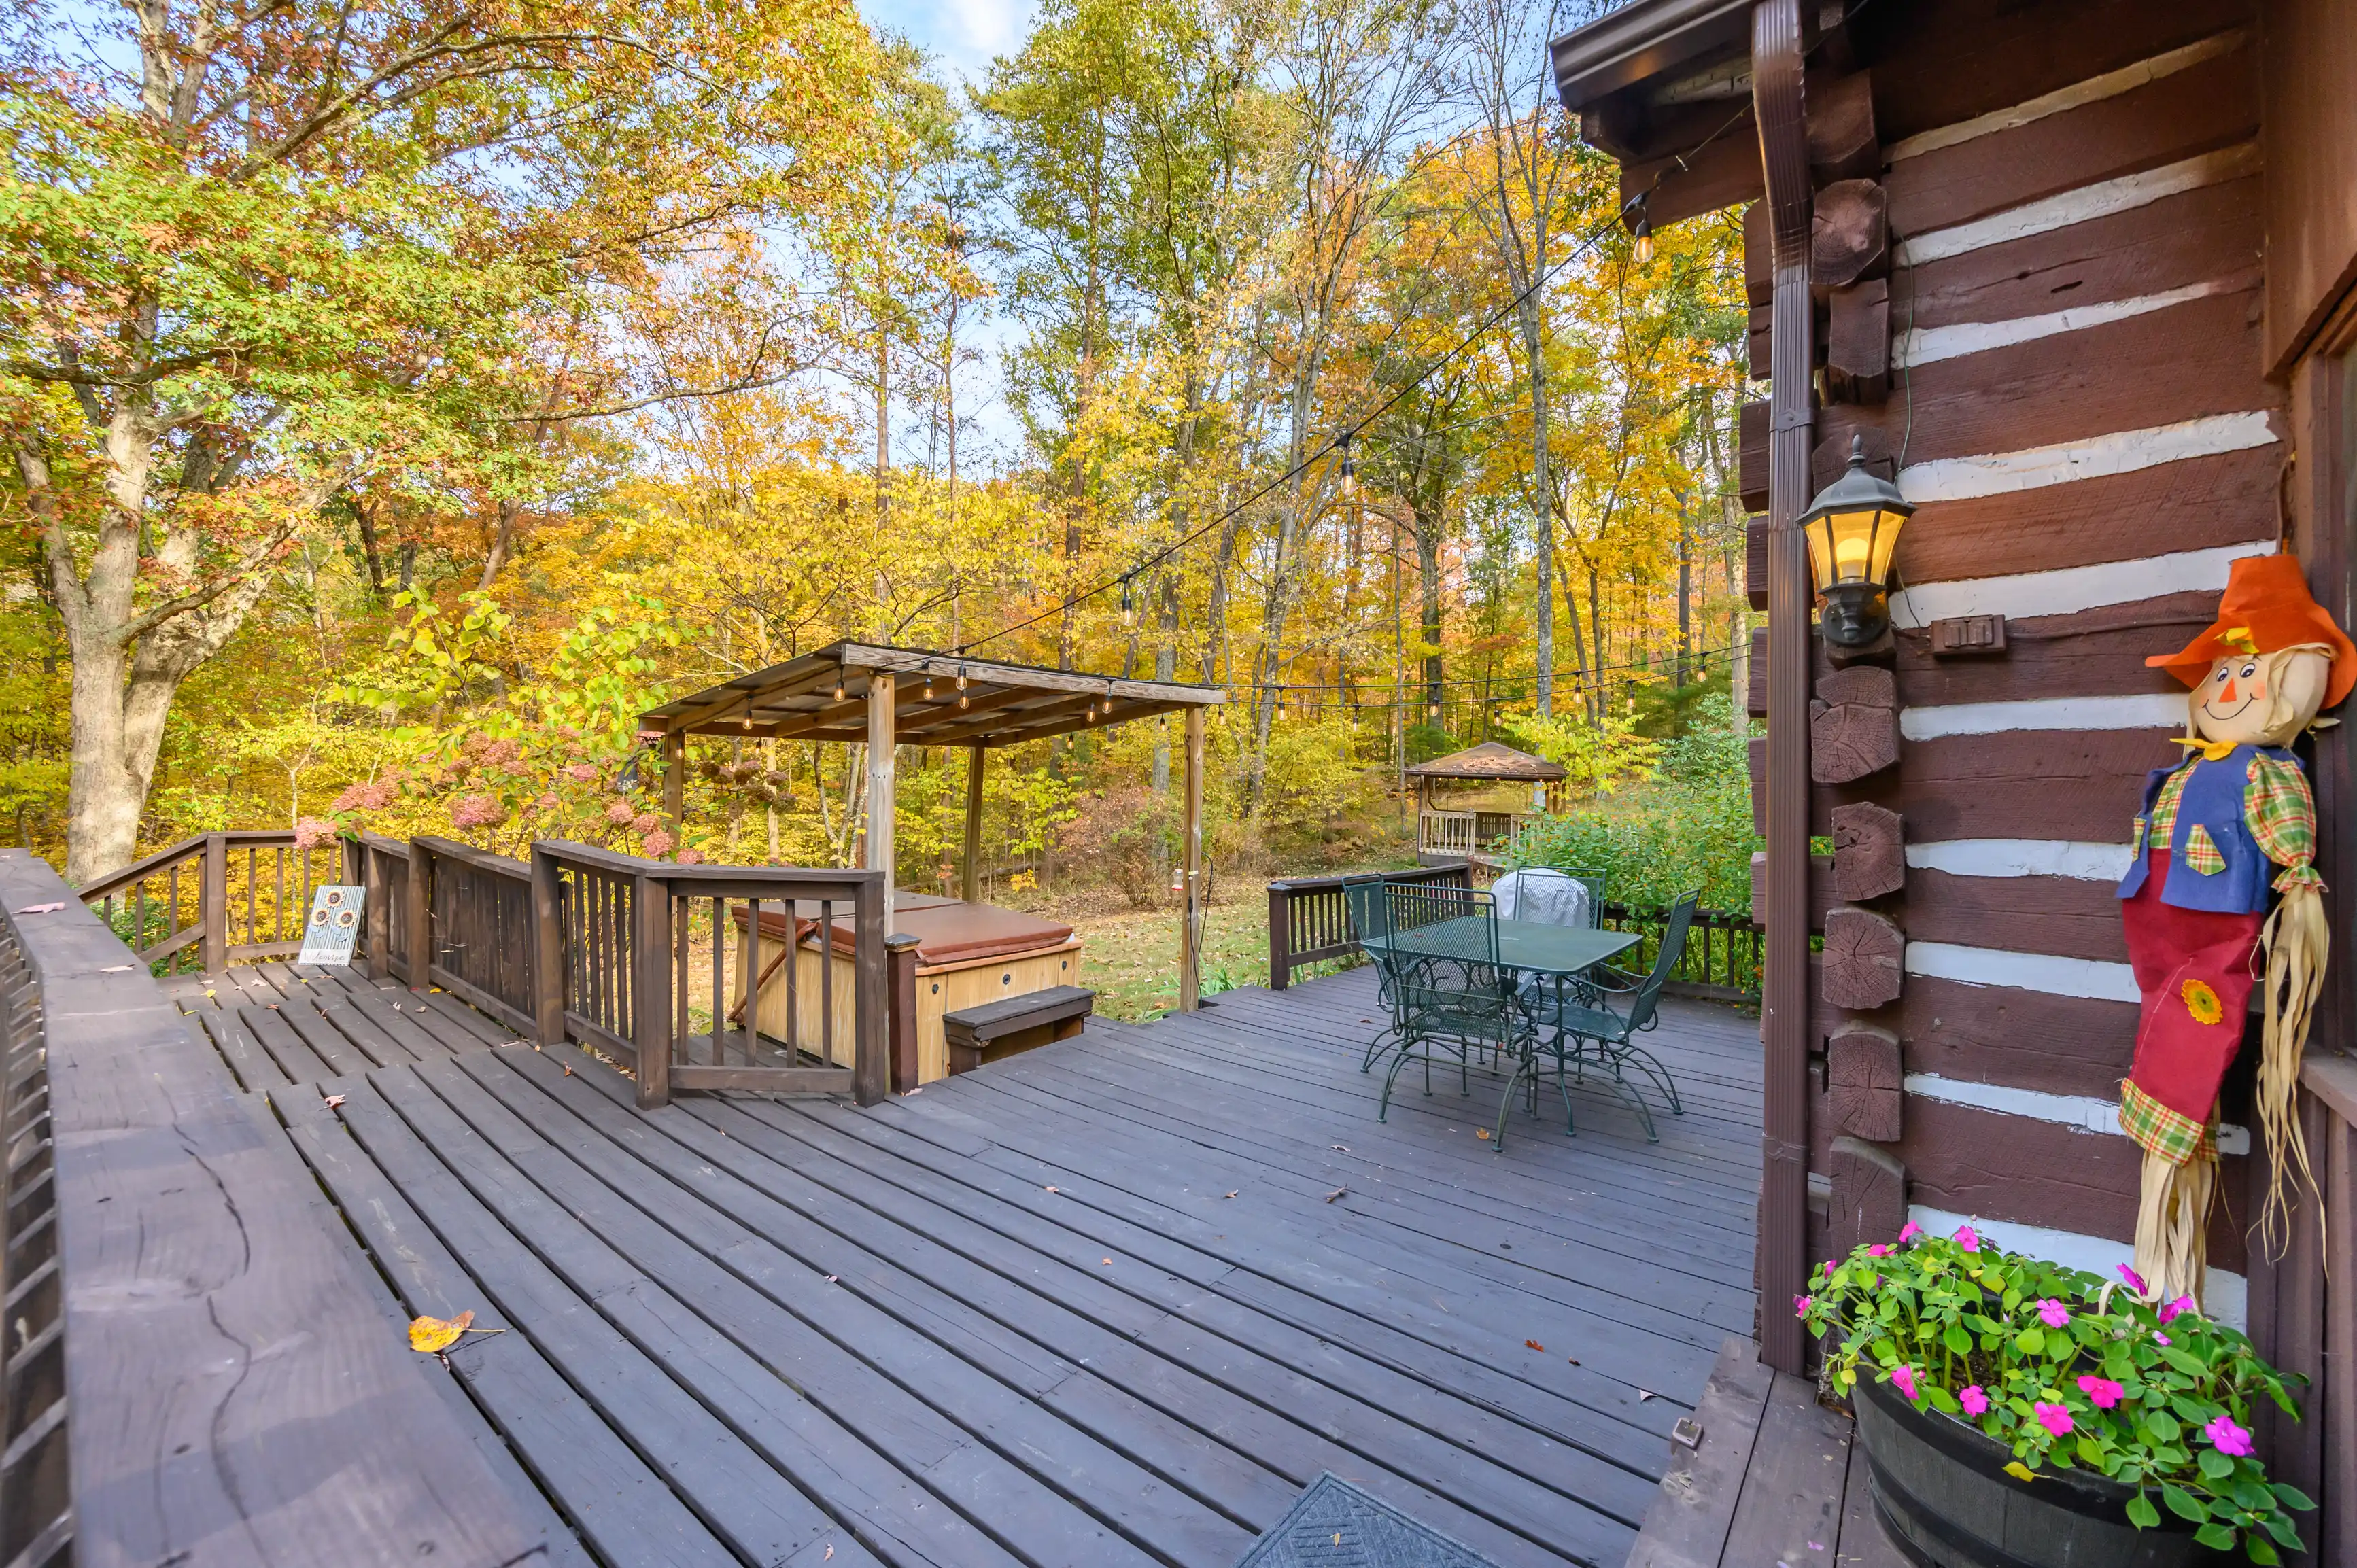 Wooden deck of a rustic cabin with patio furniture, a gazebo, and decorative scarecrow, surrounded by autumn foliage.